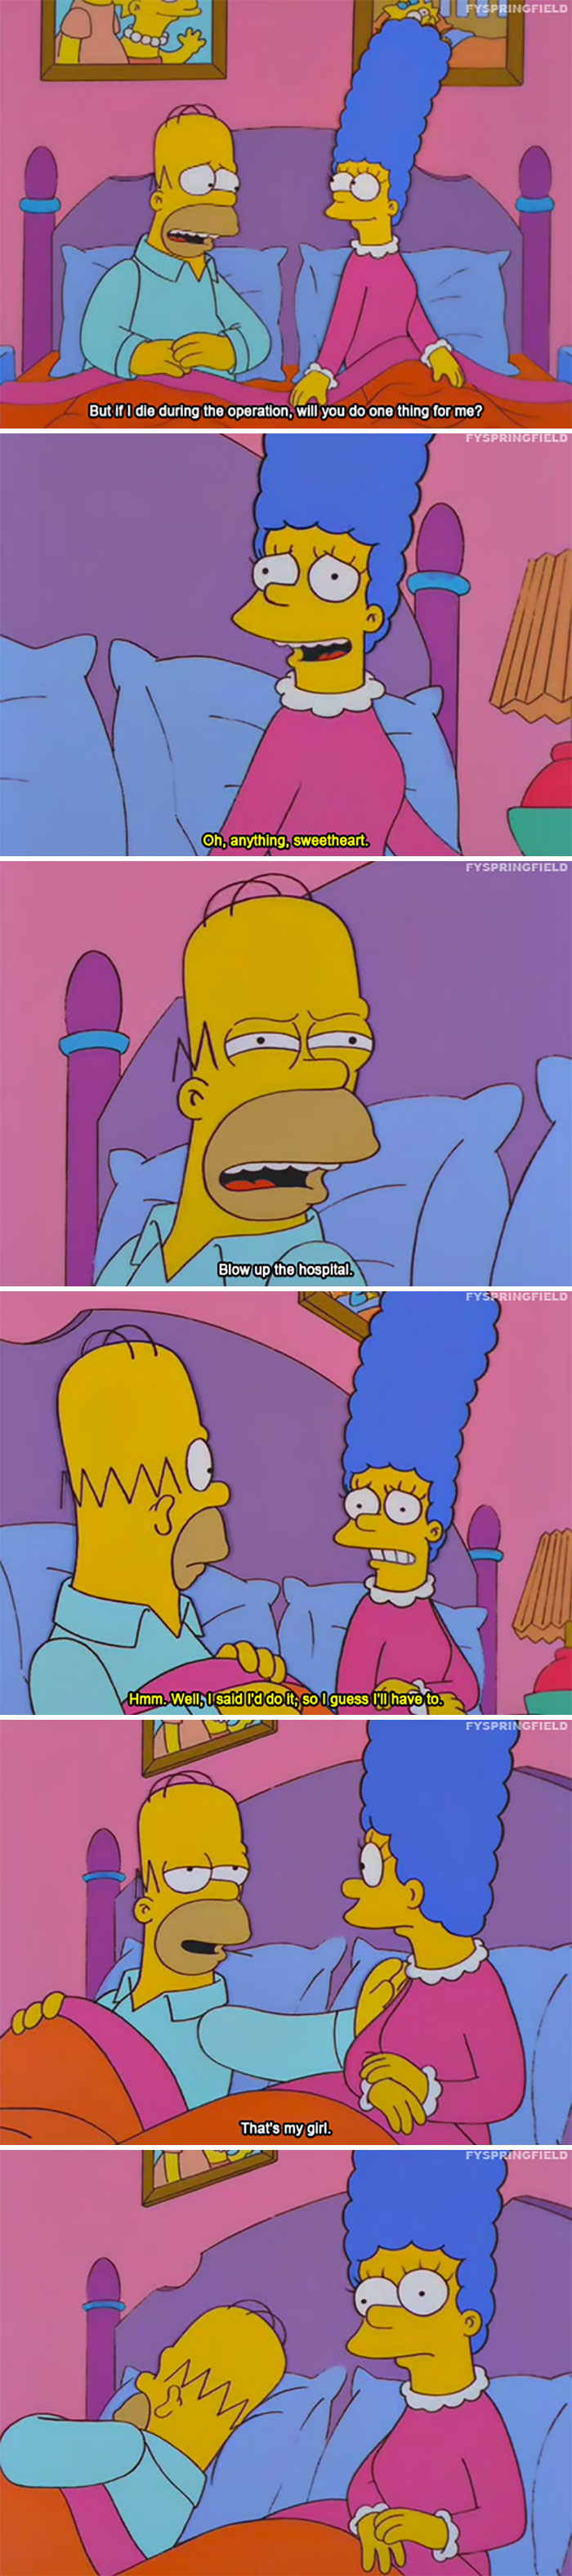 homer simpsons funnyt quotes - Yspringfield But if I die during the operation, will you do one thing for me? Fyspringfield Oh, anything, sweetheart. Fyspringfield Blow up the hospital. Fyspringfield Hmm. Wellbusaid vd do it, so I guess I'll have to Fyspri